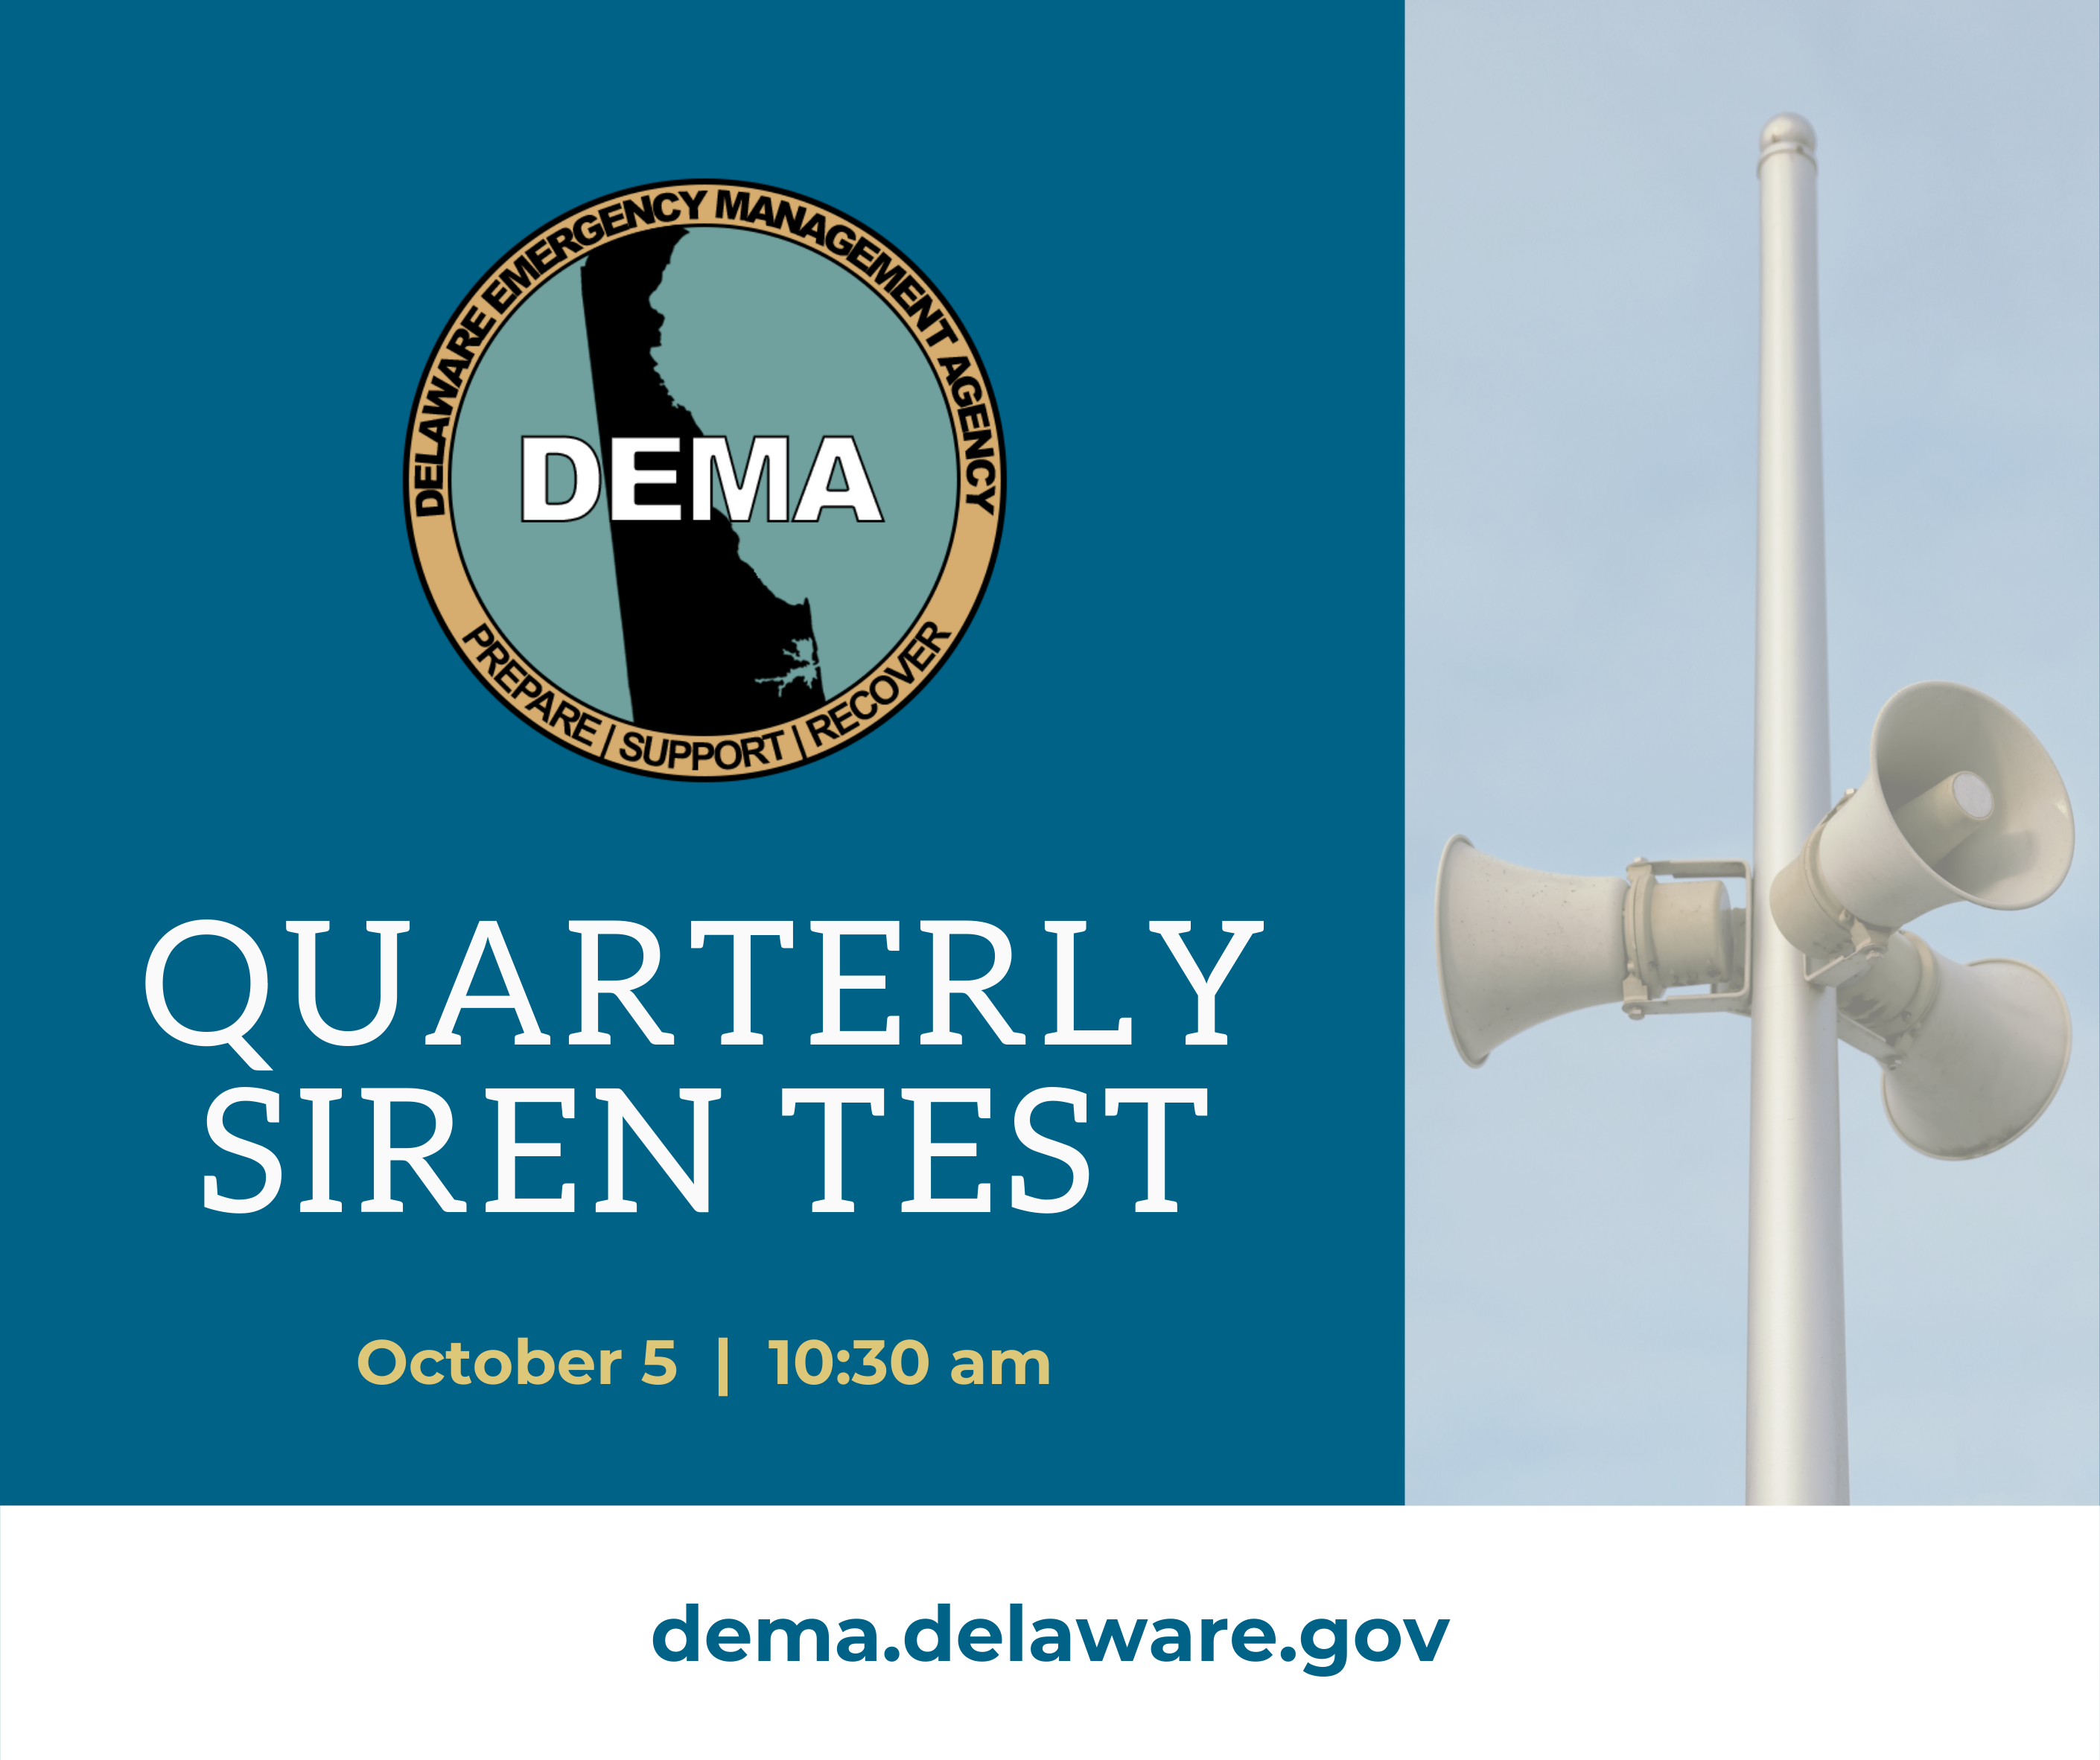 Image of a siren tower with the words Quarterly Siren Test October 5 at 10:30am and the DEMA logo